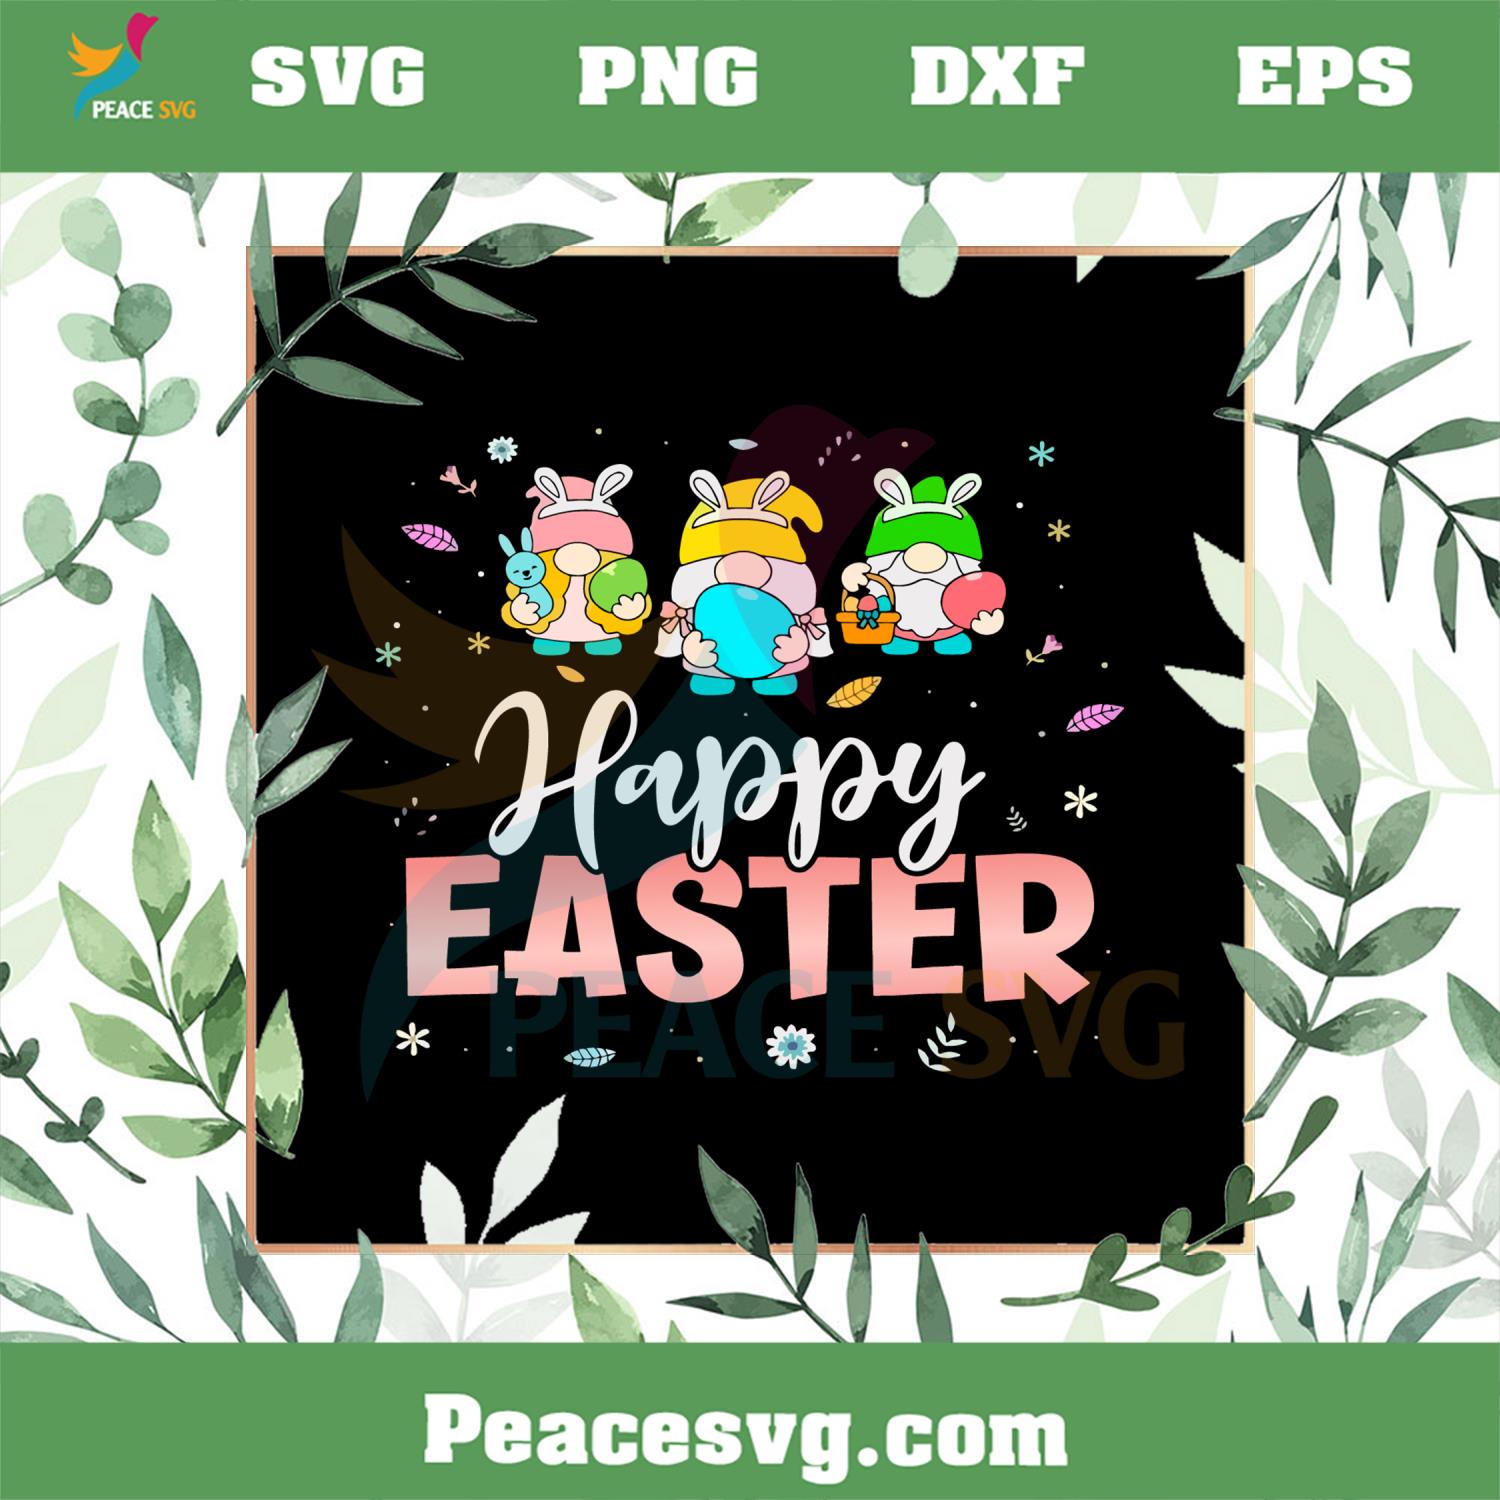 Happy Easter Day Cute Gnomes with Bunny Ears and Eggs SVG Cutting Files